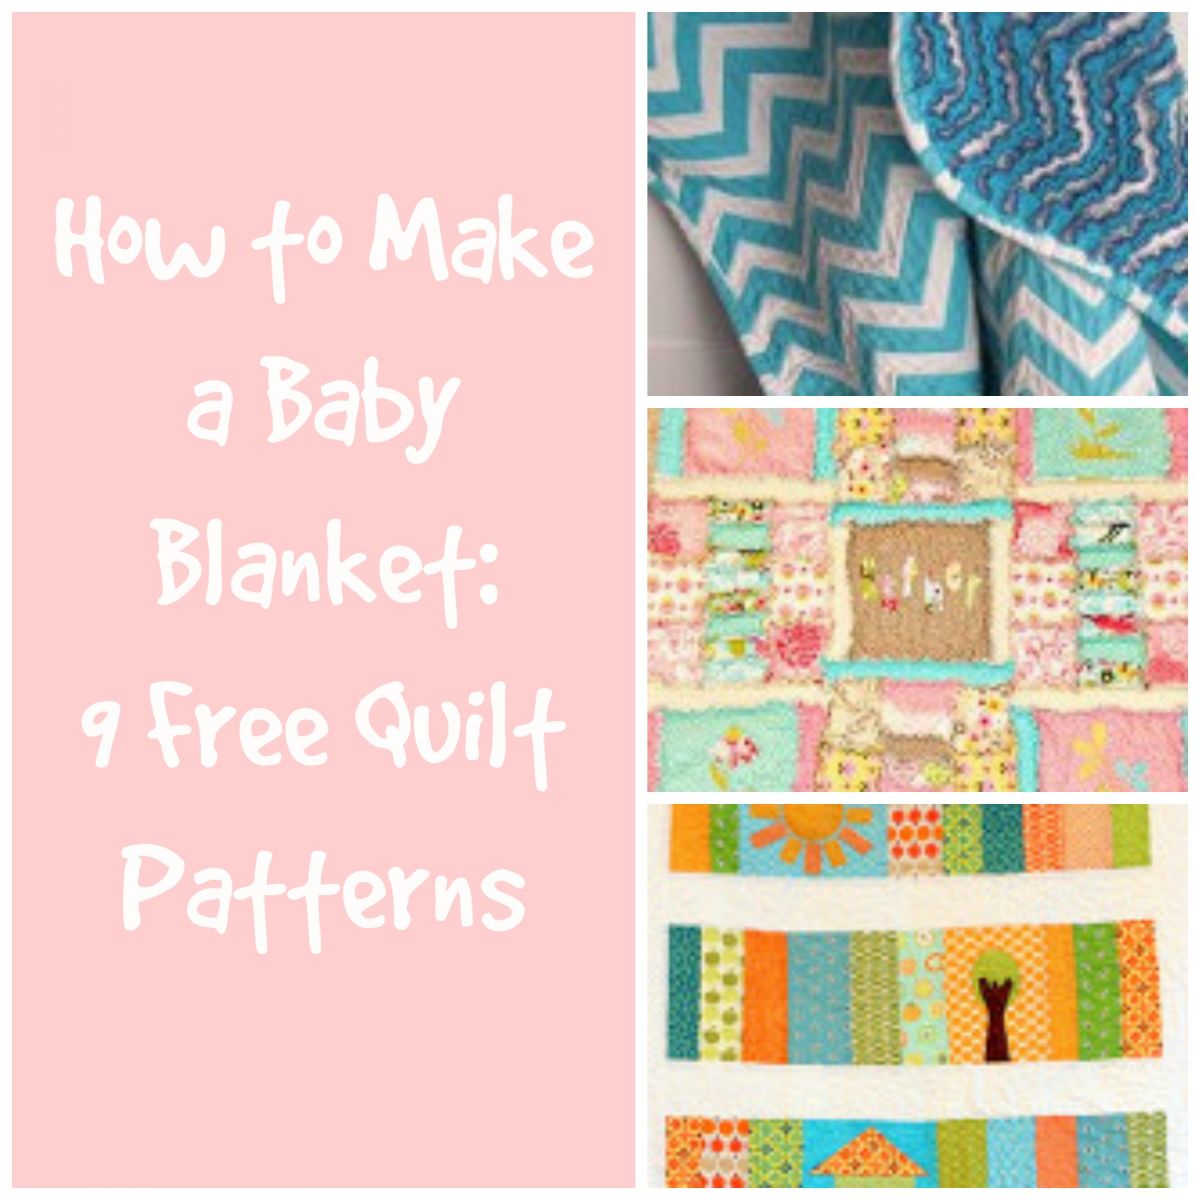 How to Make a Baby Blanket